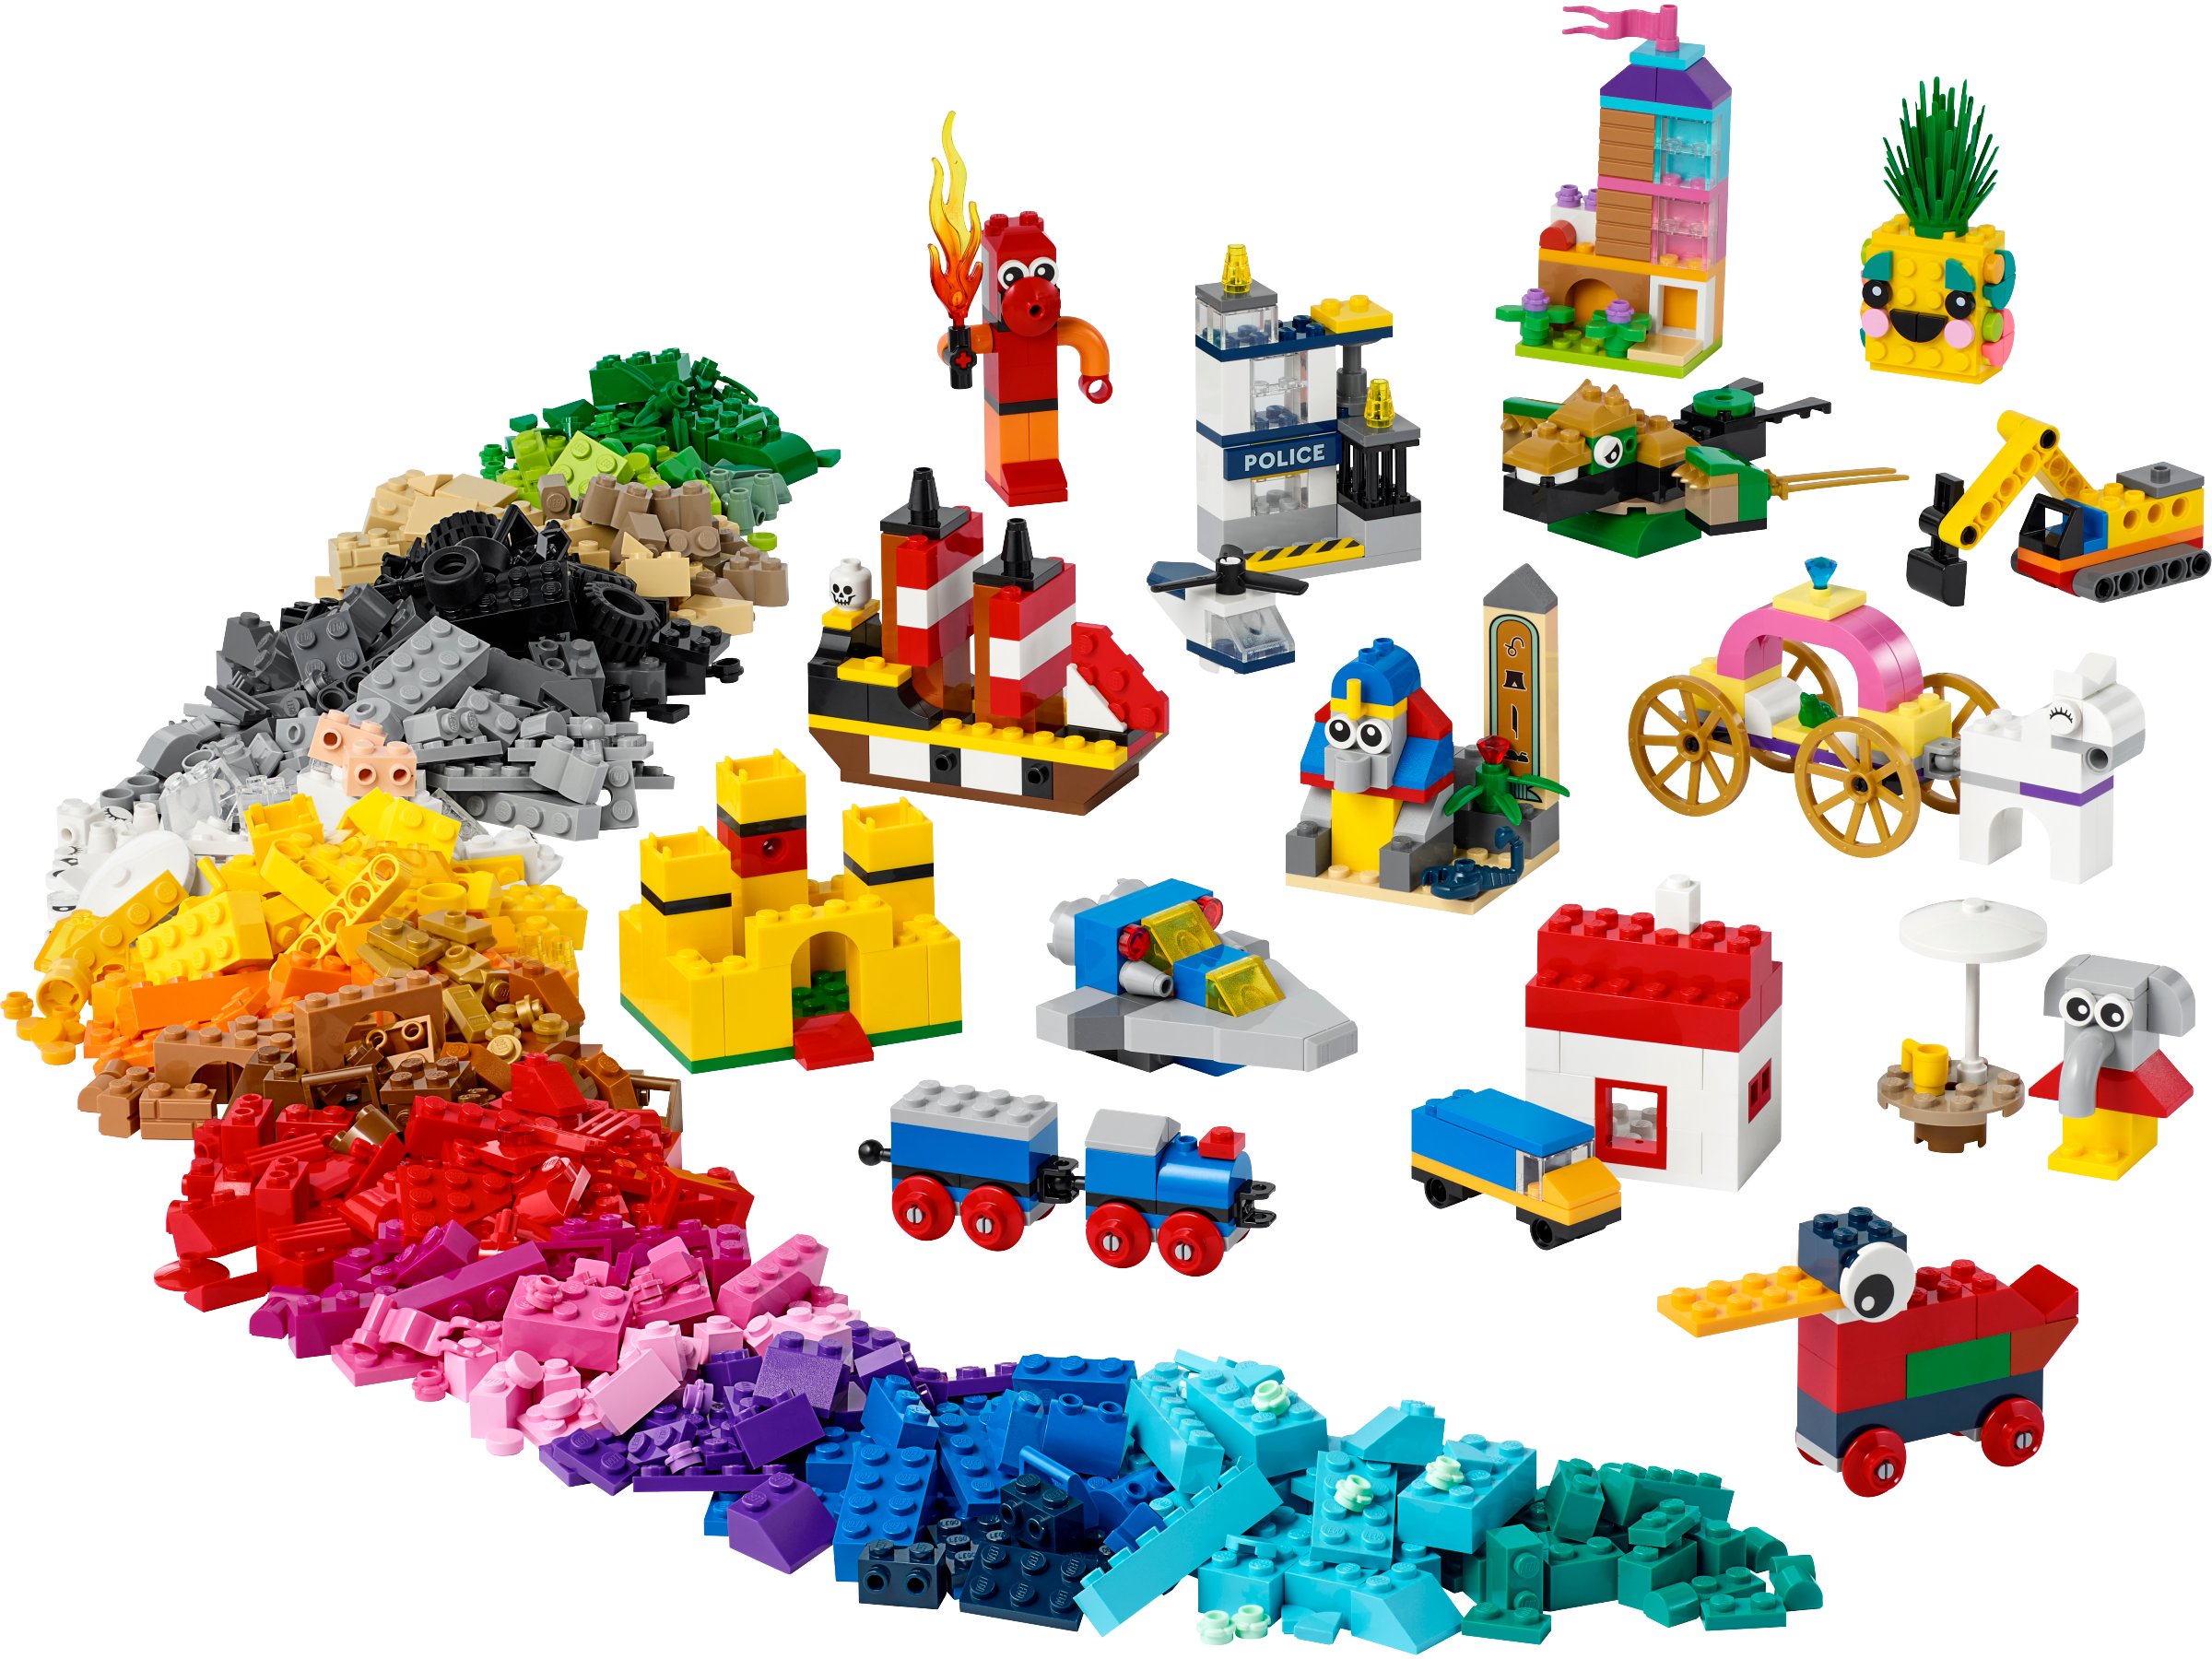 Years of Play 11021 | Classic | Buy online at the Official LEGO® Shop US